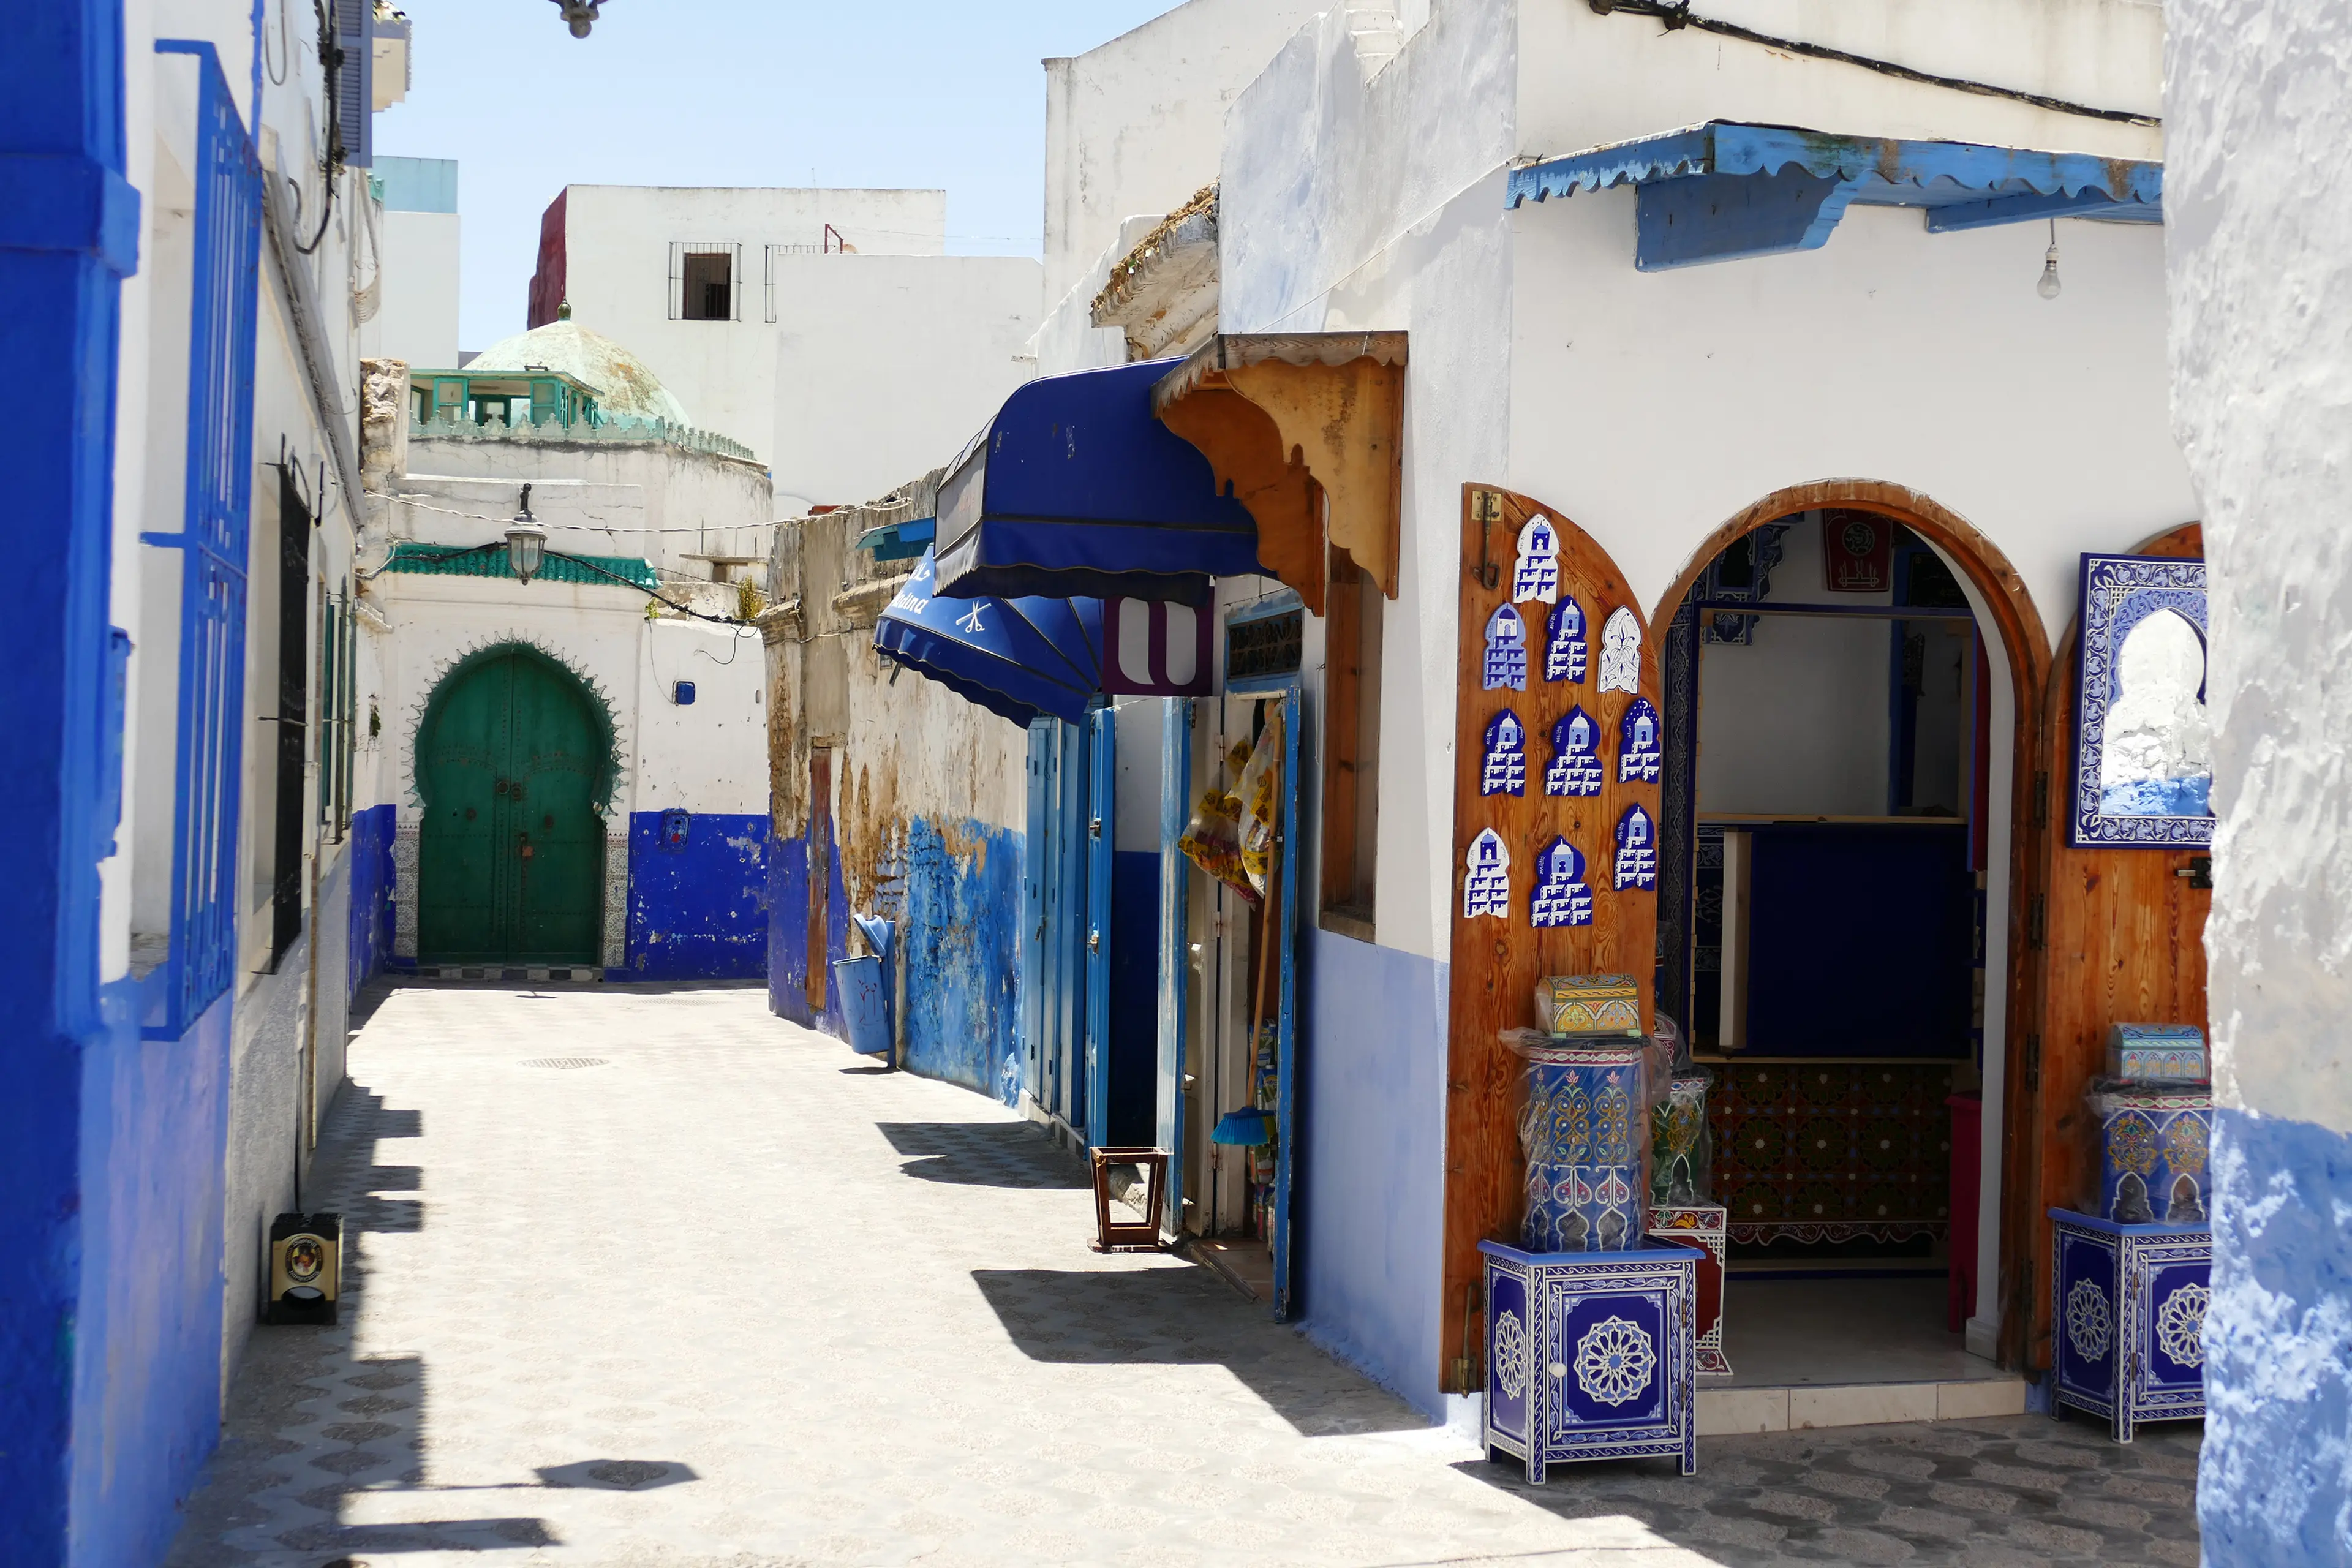 2-Day Excursion Guide to Asilah, Morocco